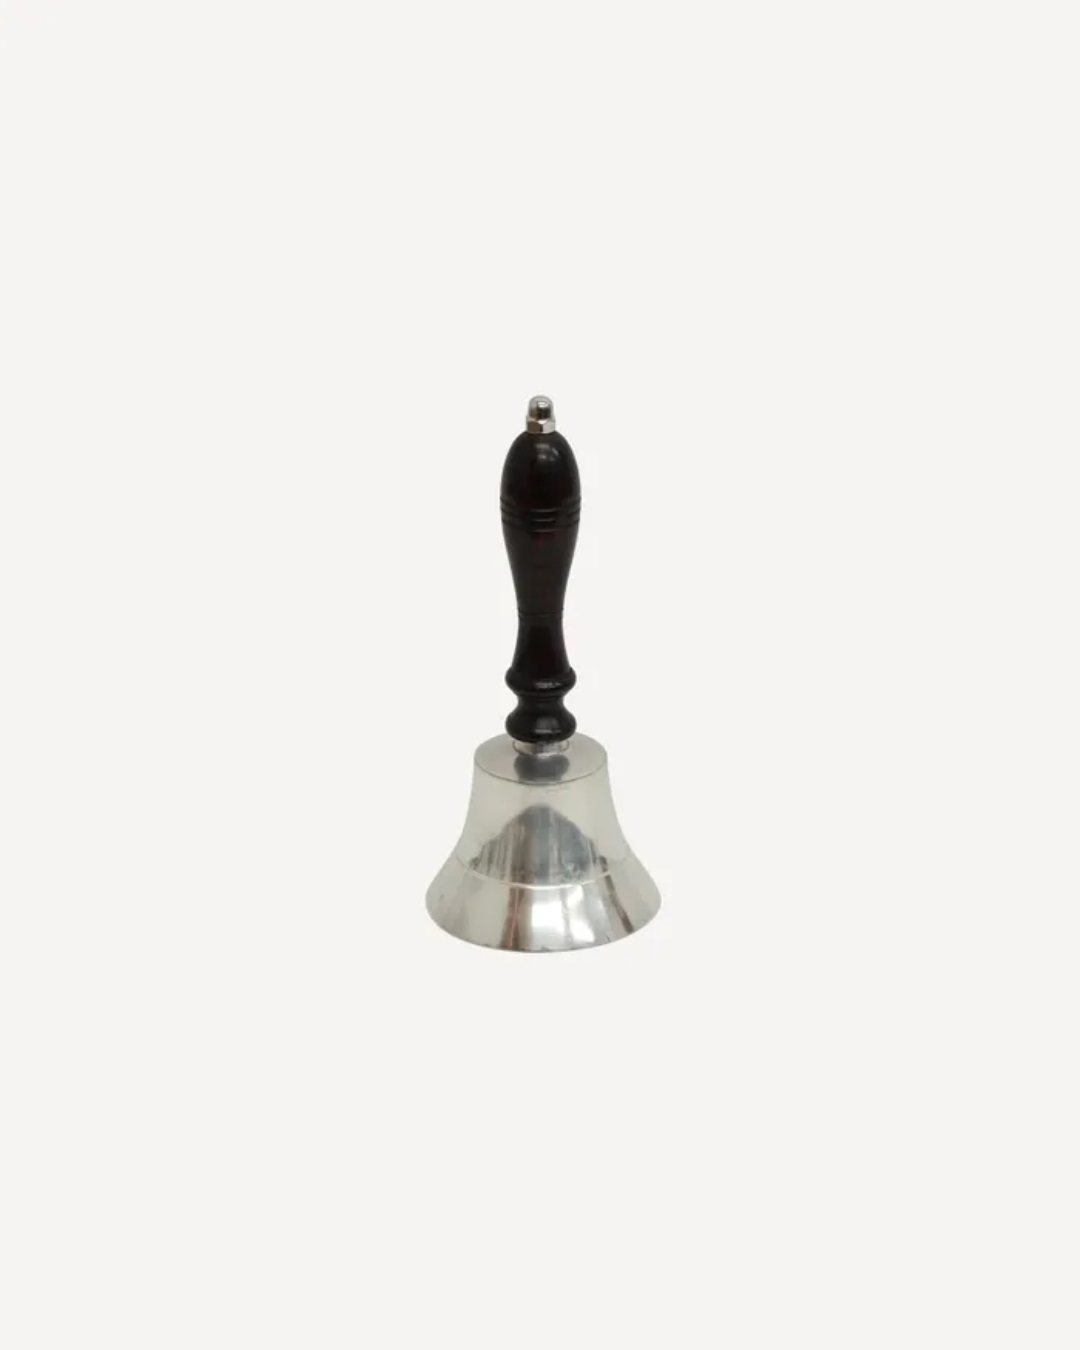 Desk bell silver with wooden handle